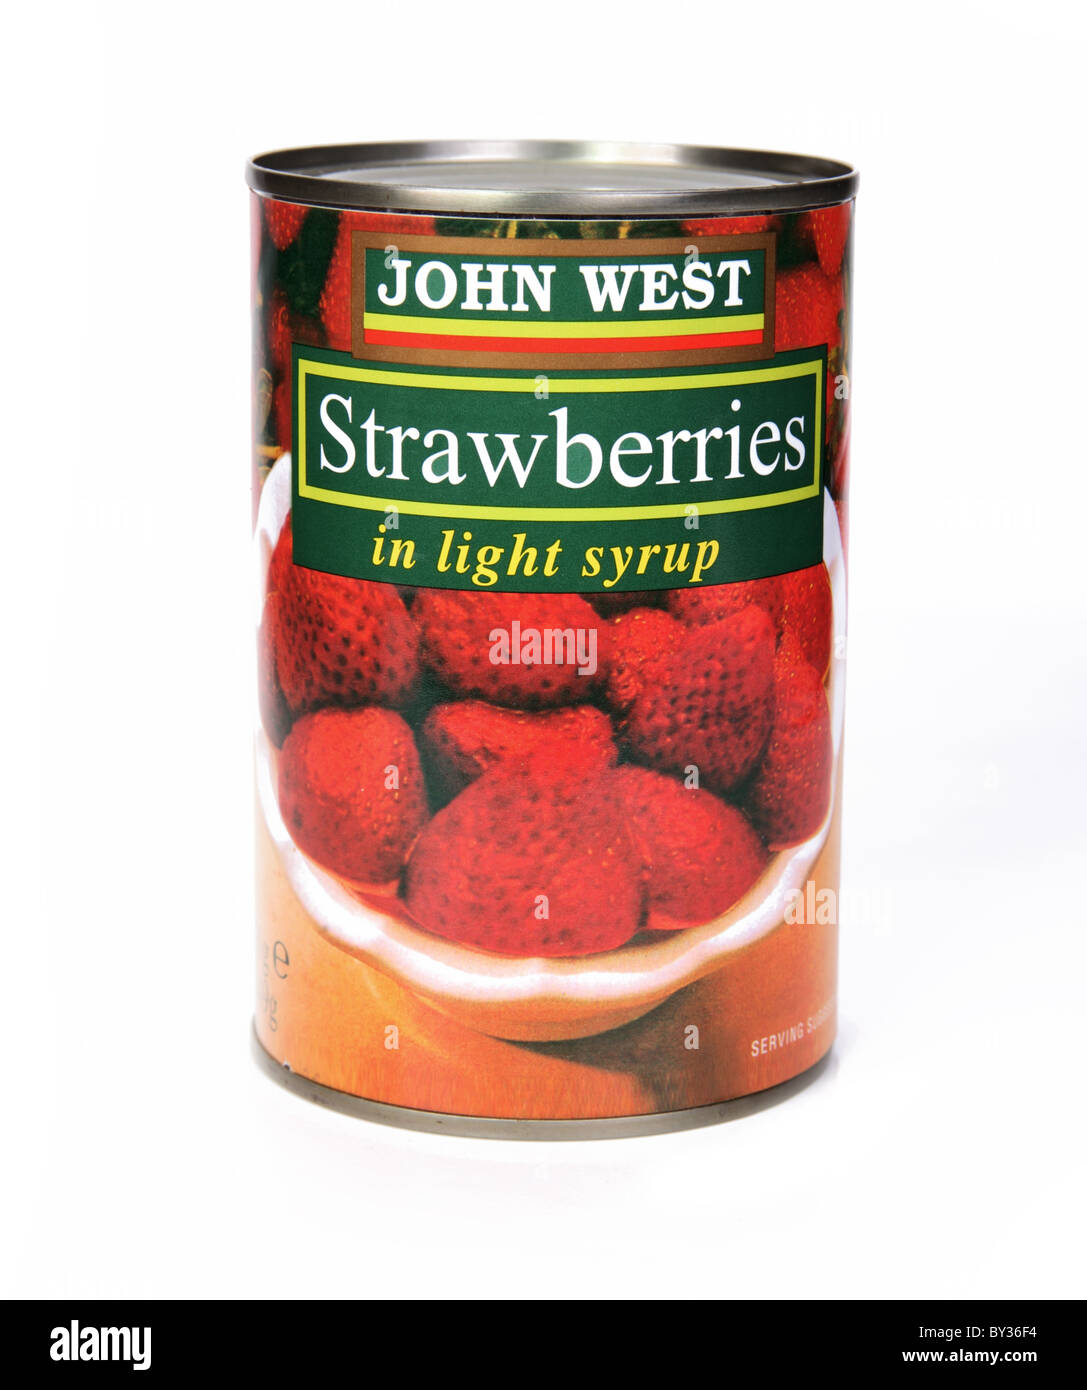 A tin of strawberries in light syrup; John West brand on white background Stock Photo